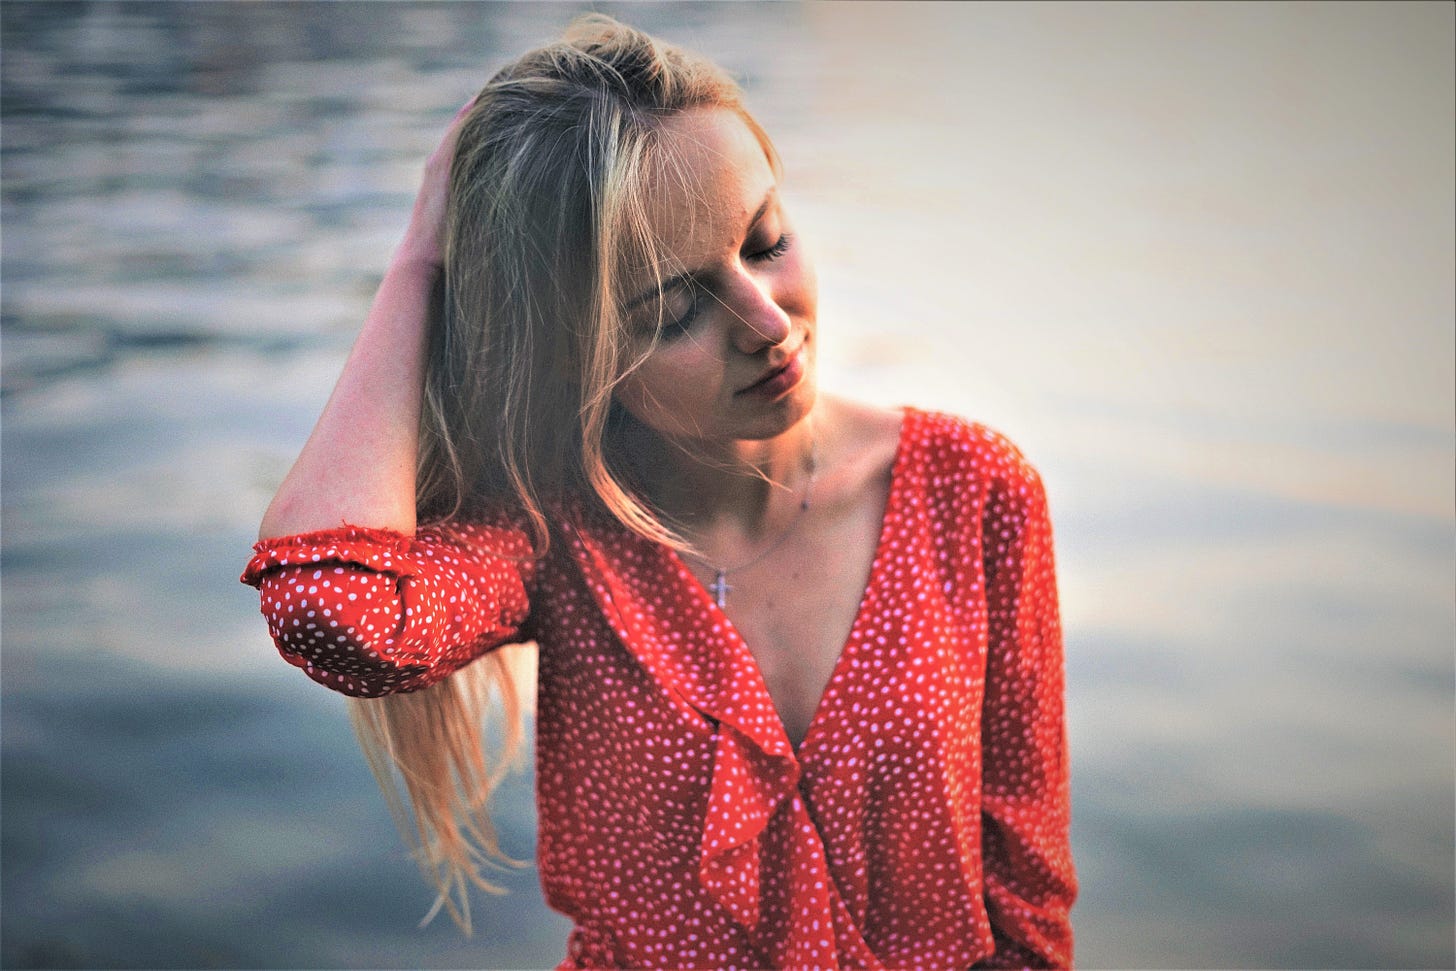 pensive girl with blonde hair wearing red and white polka dot top watery background